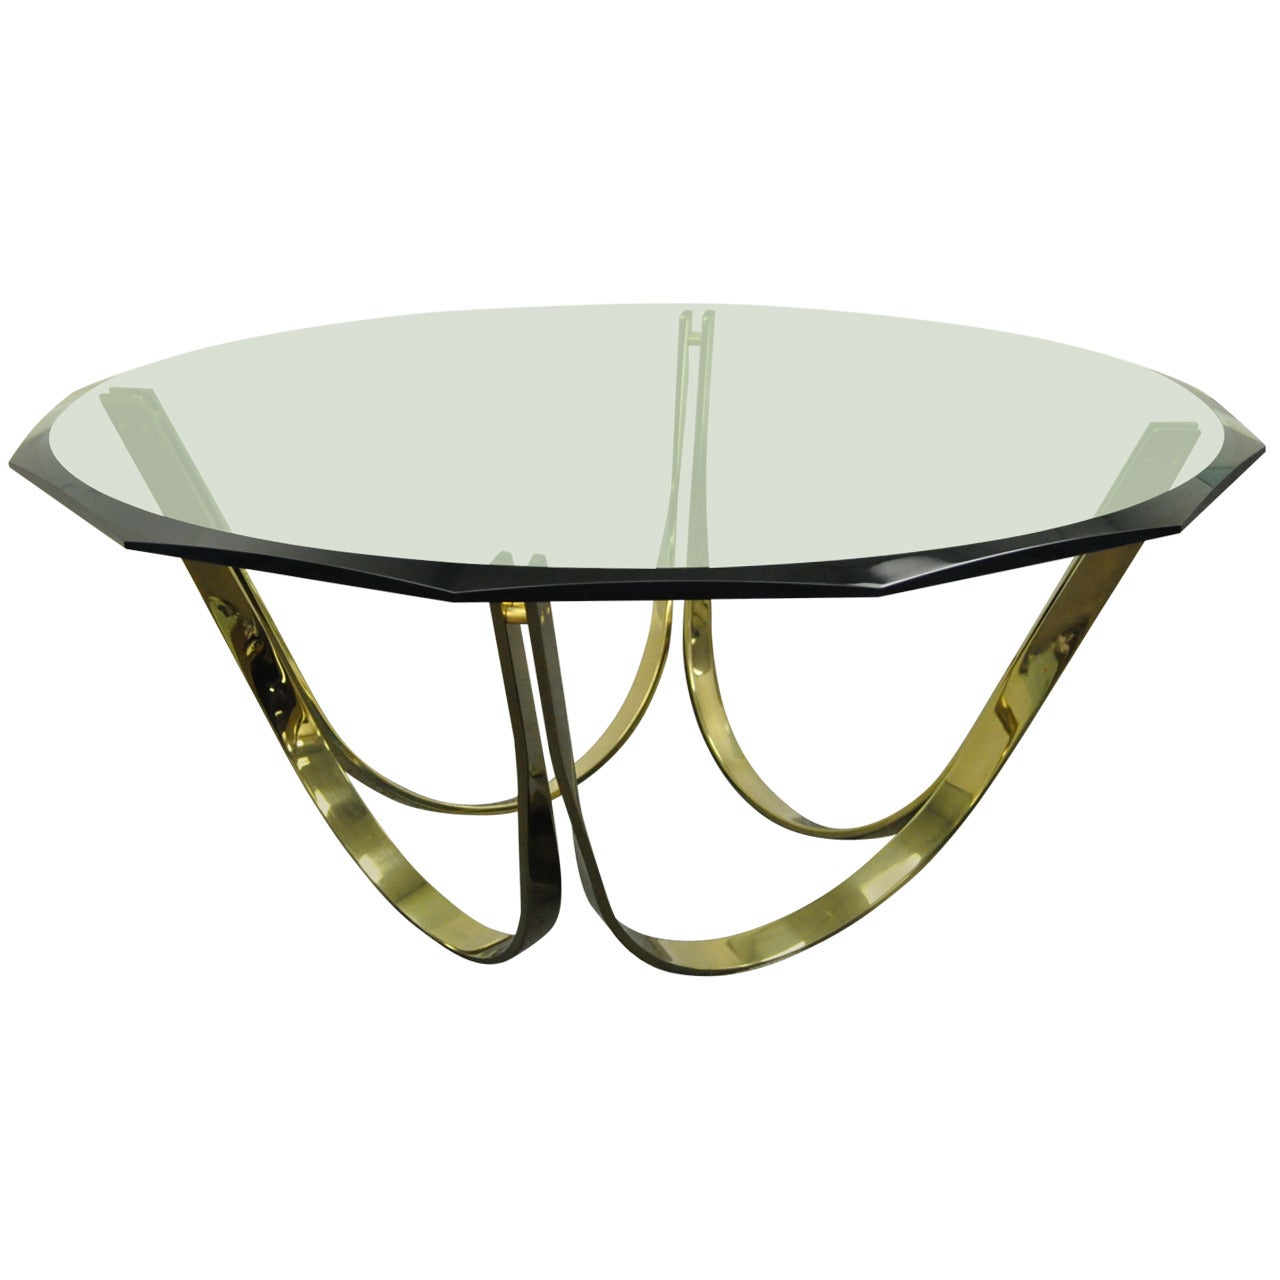 Trimark Brass Plated Steel & Glass Coffee Table after Roger Sprunger for Dunbar For Sale